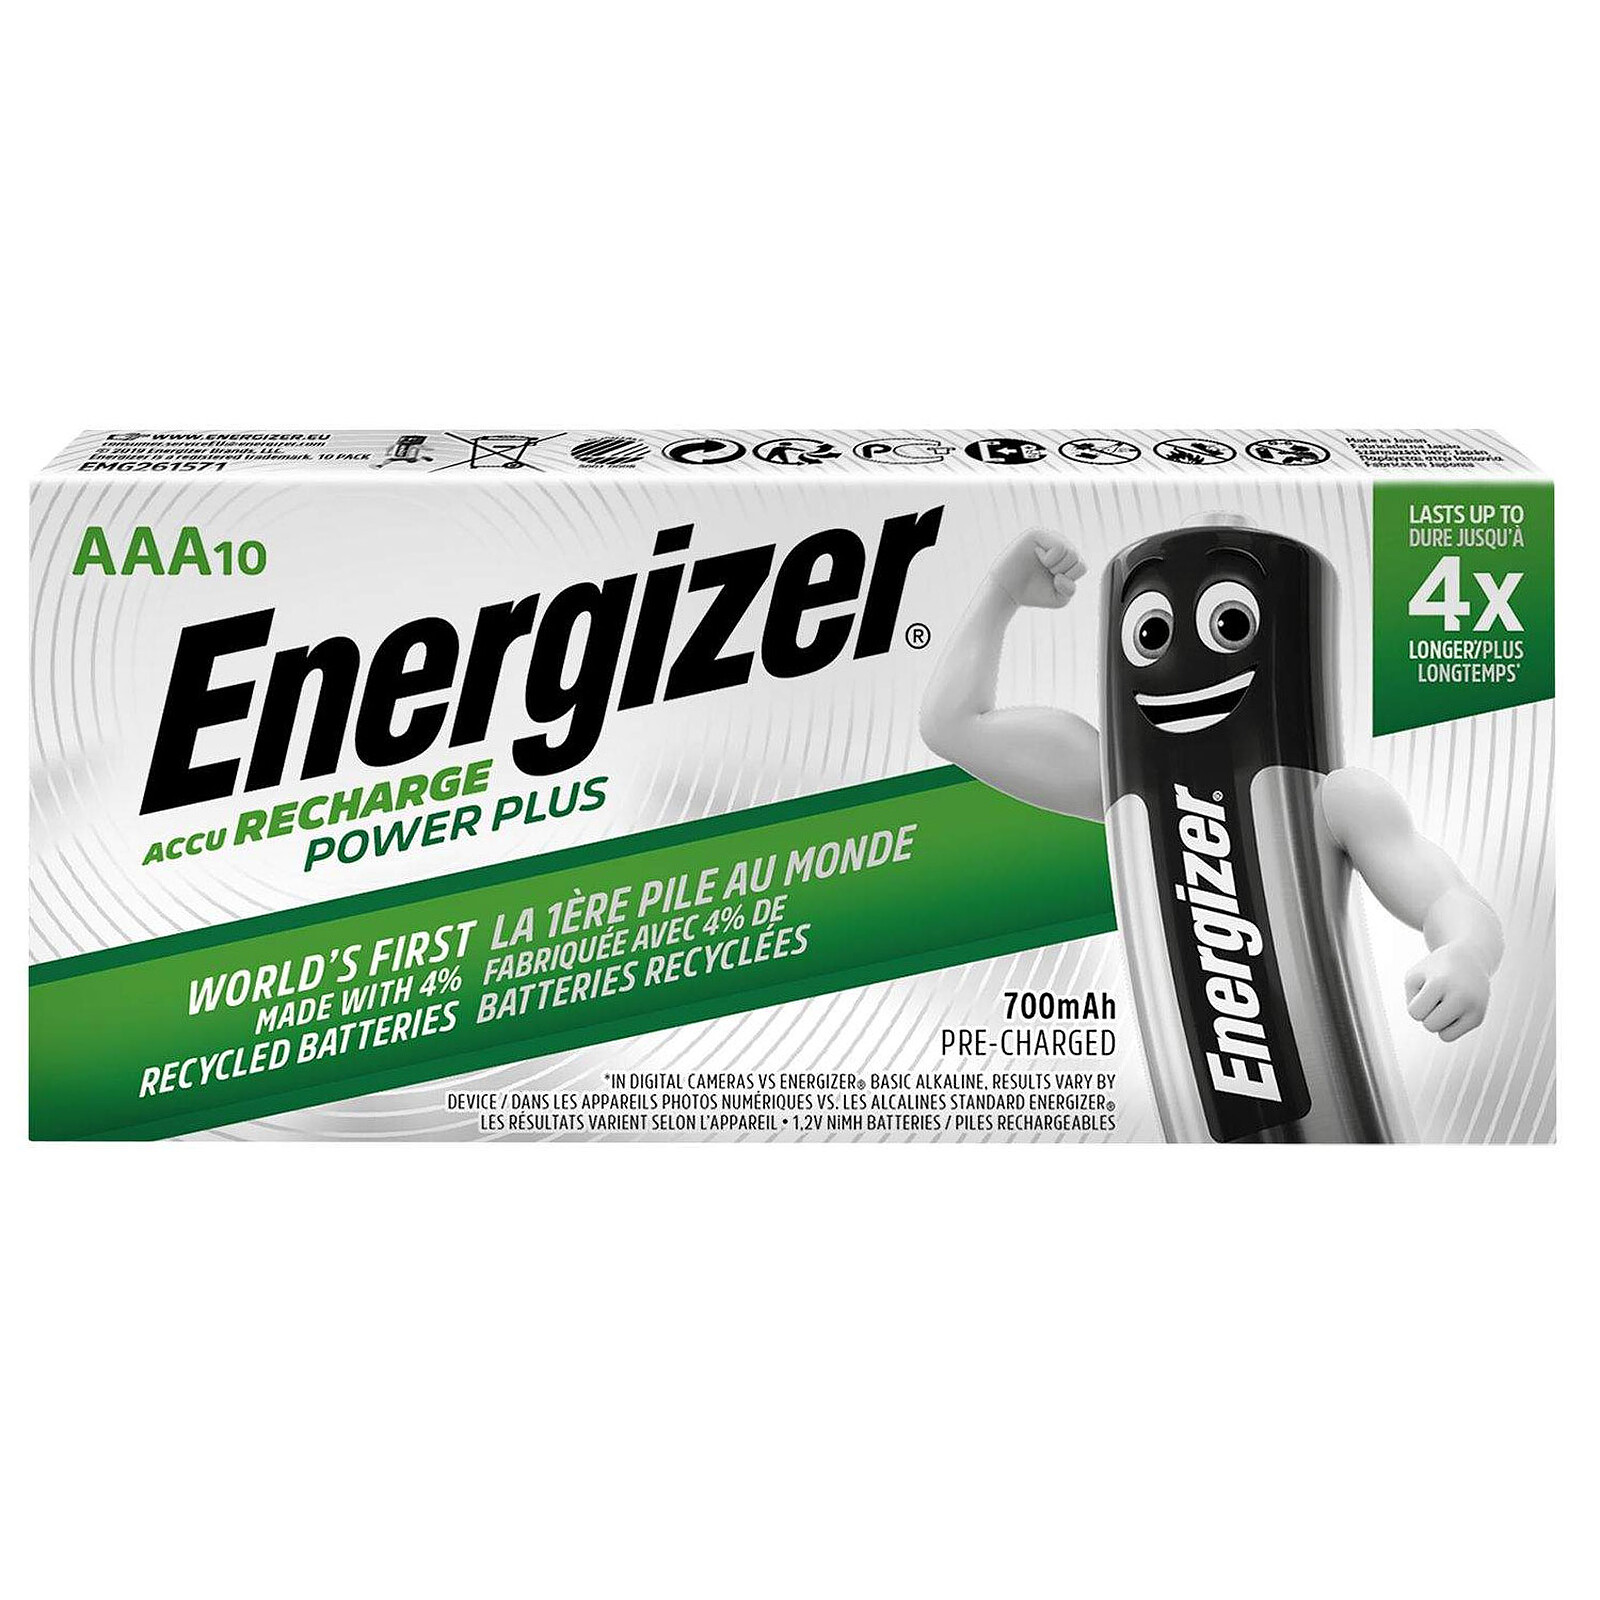 Piles Energizer Recharge Power Plus - AA, AAA, 9V, C, D Belgium (French)